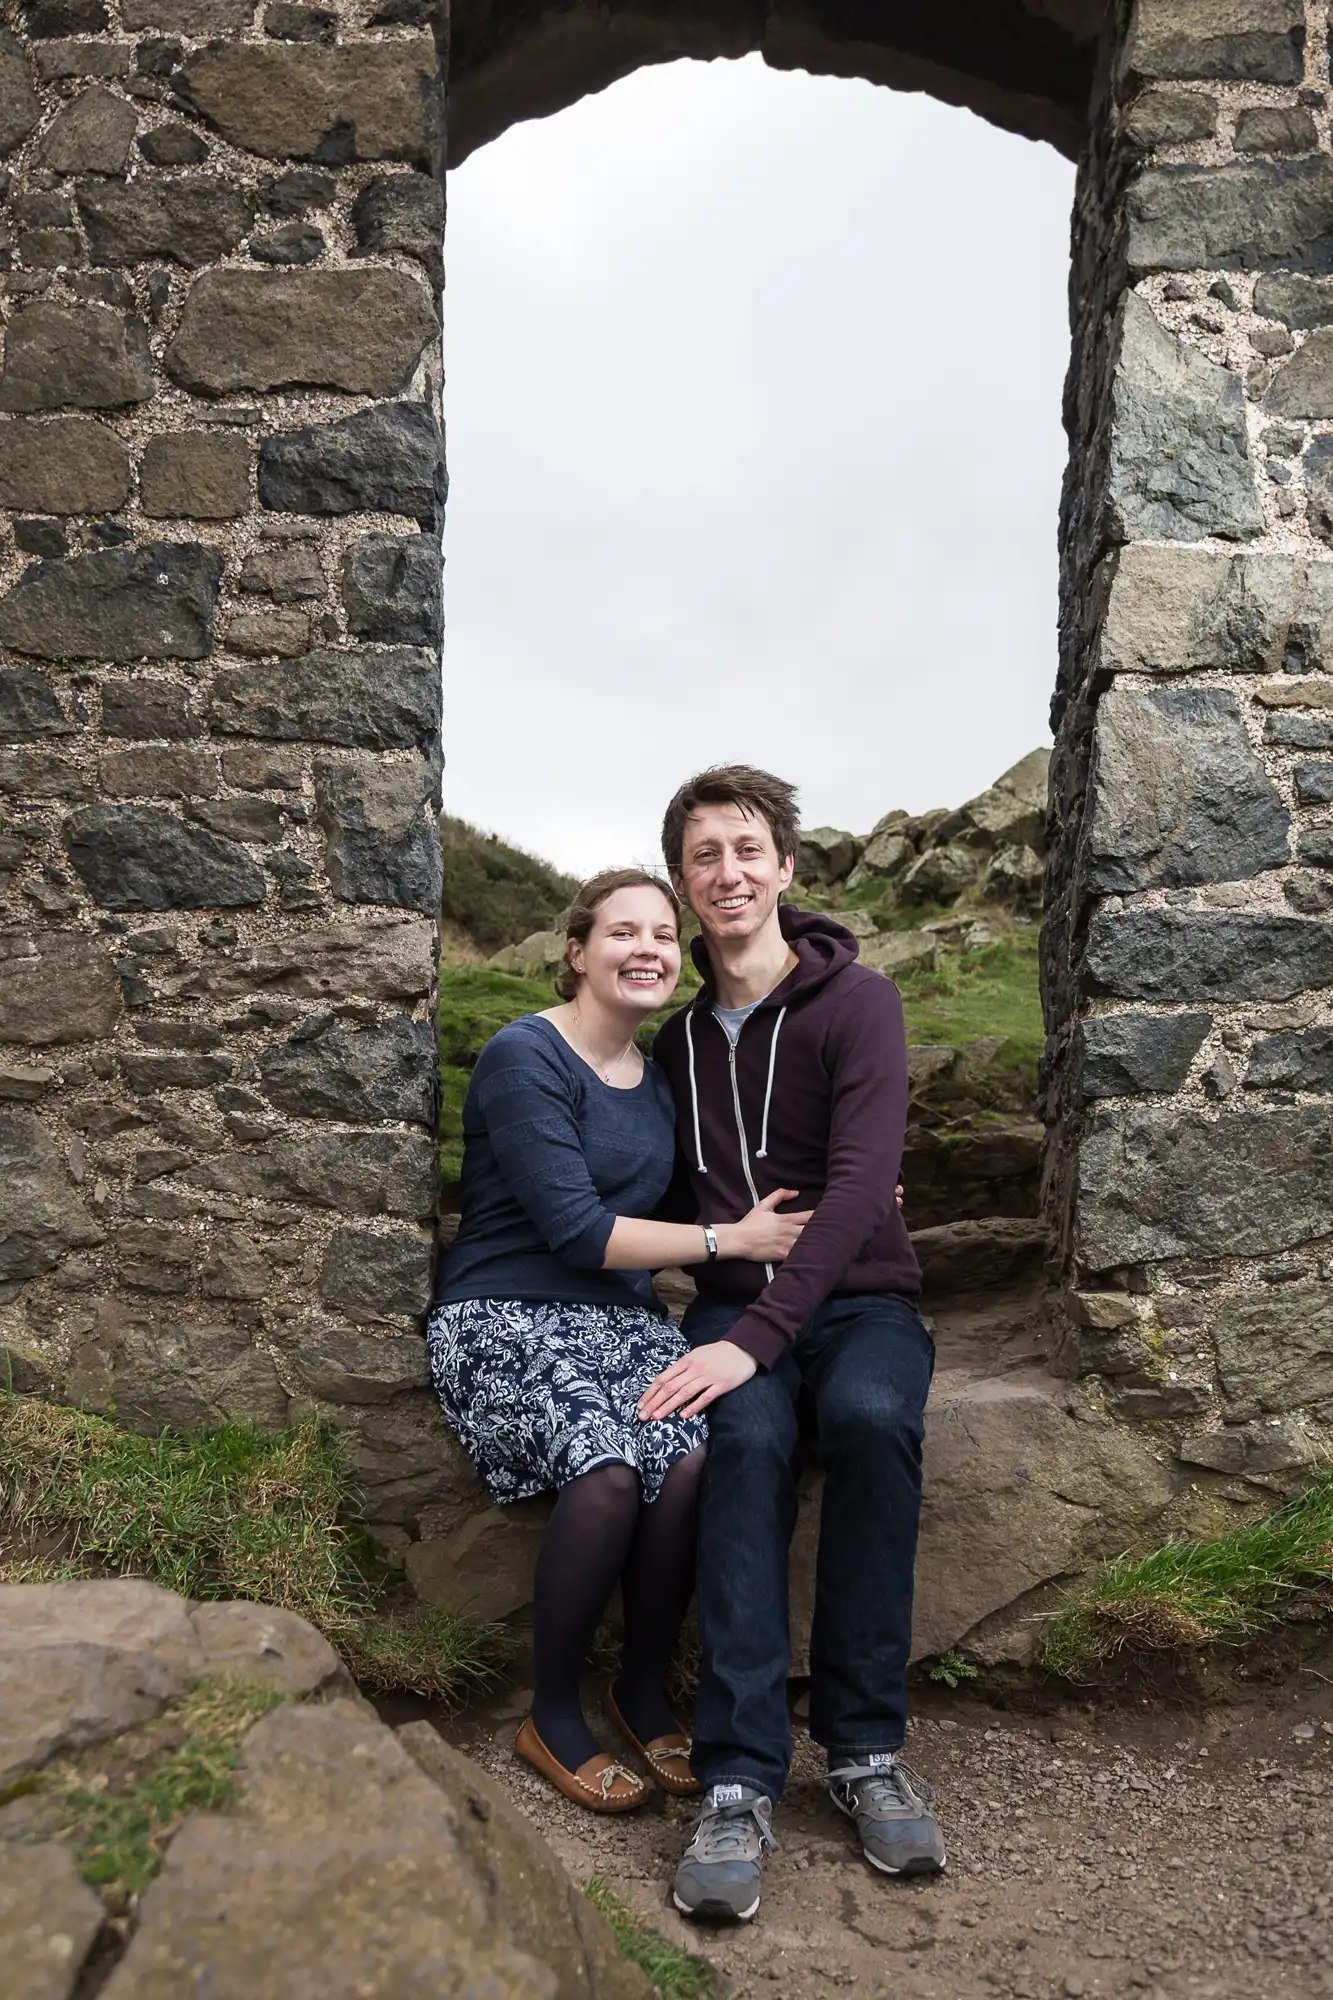 A couple smiling and sitting together in an archway of a stone ruin, surrounded by grassy hills.